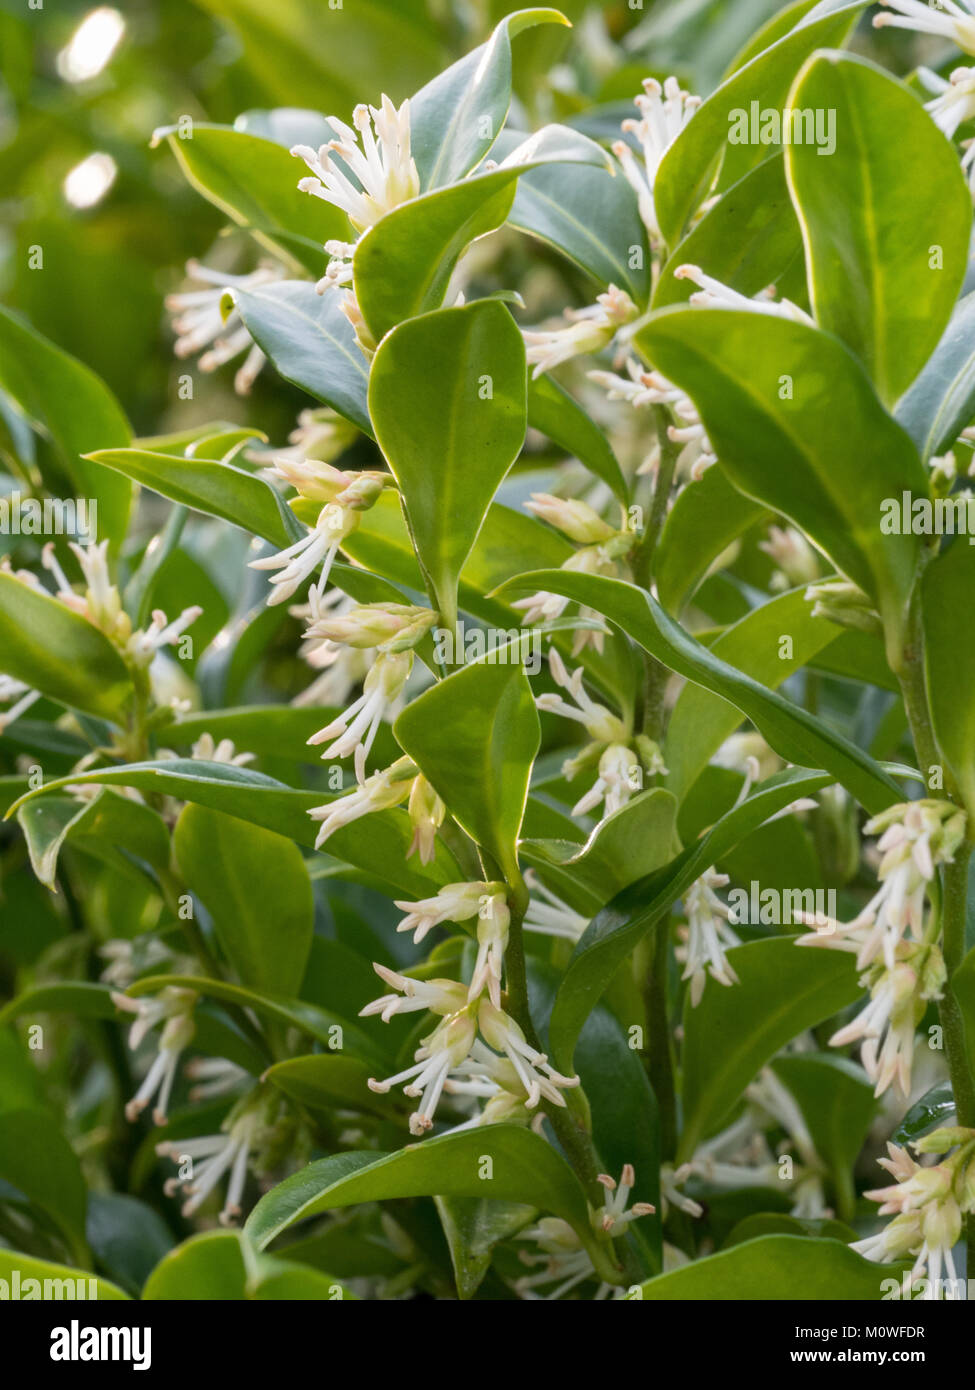 White flowers on the evergreen foliage of Sarcocca confusa Stock Photo